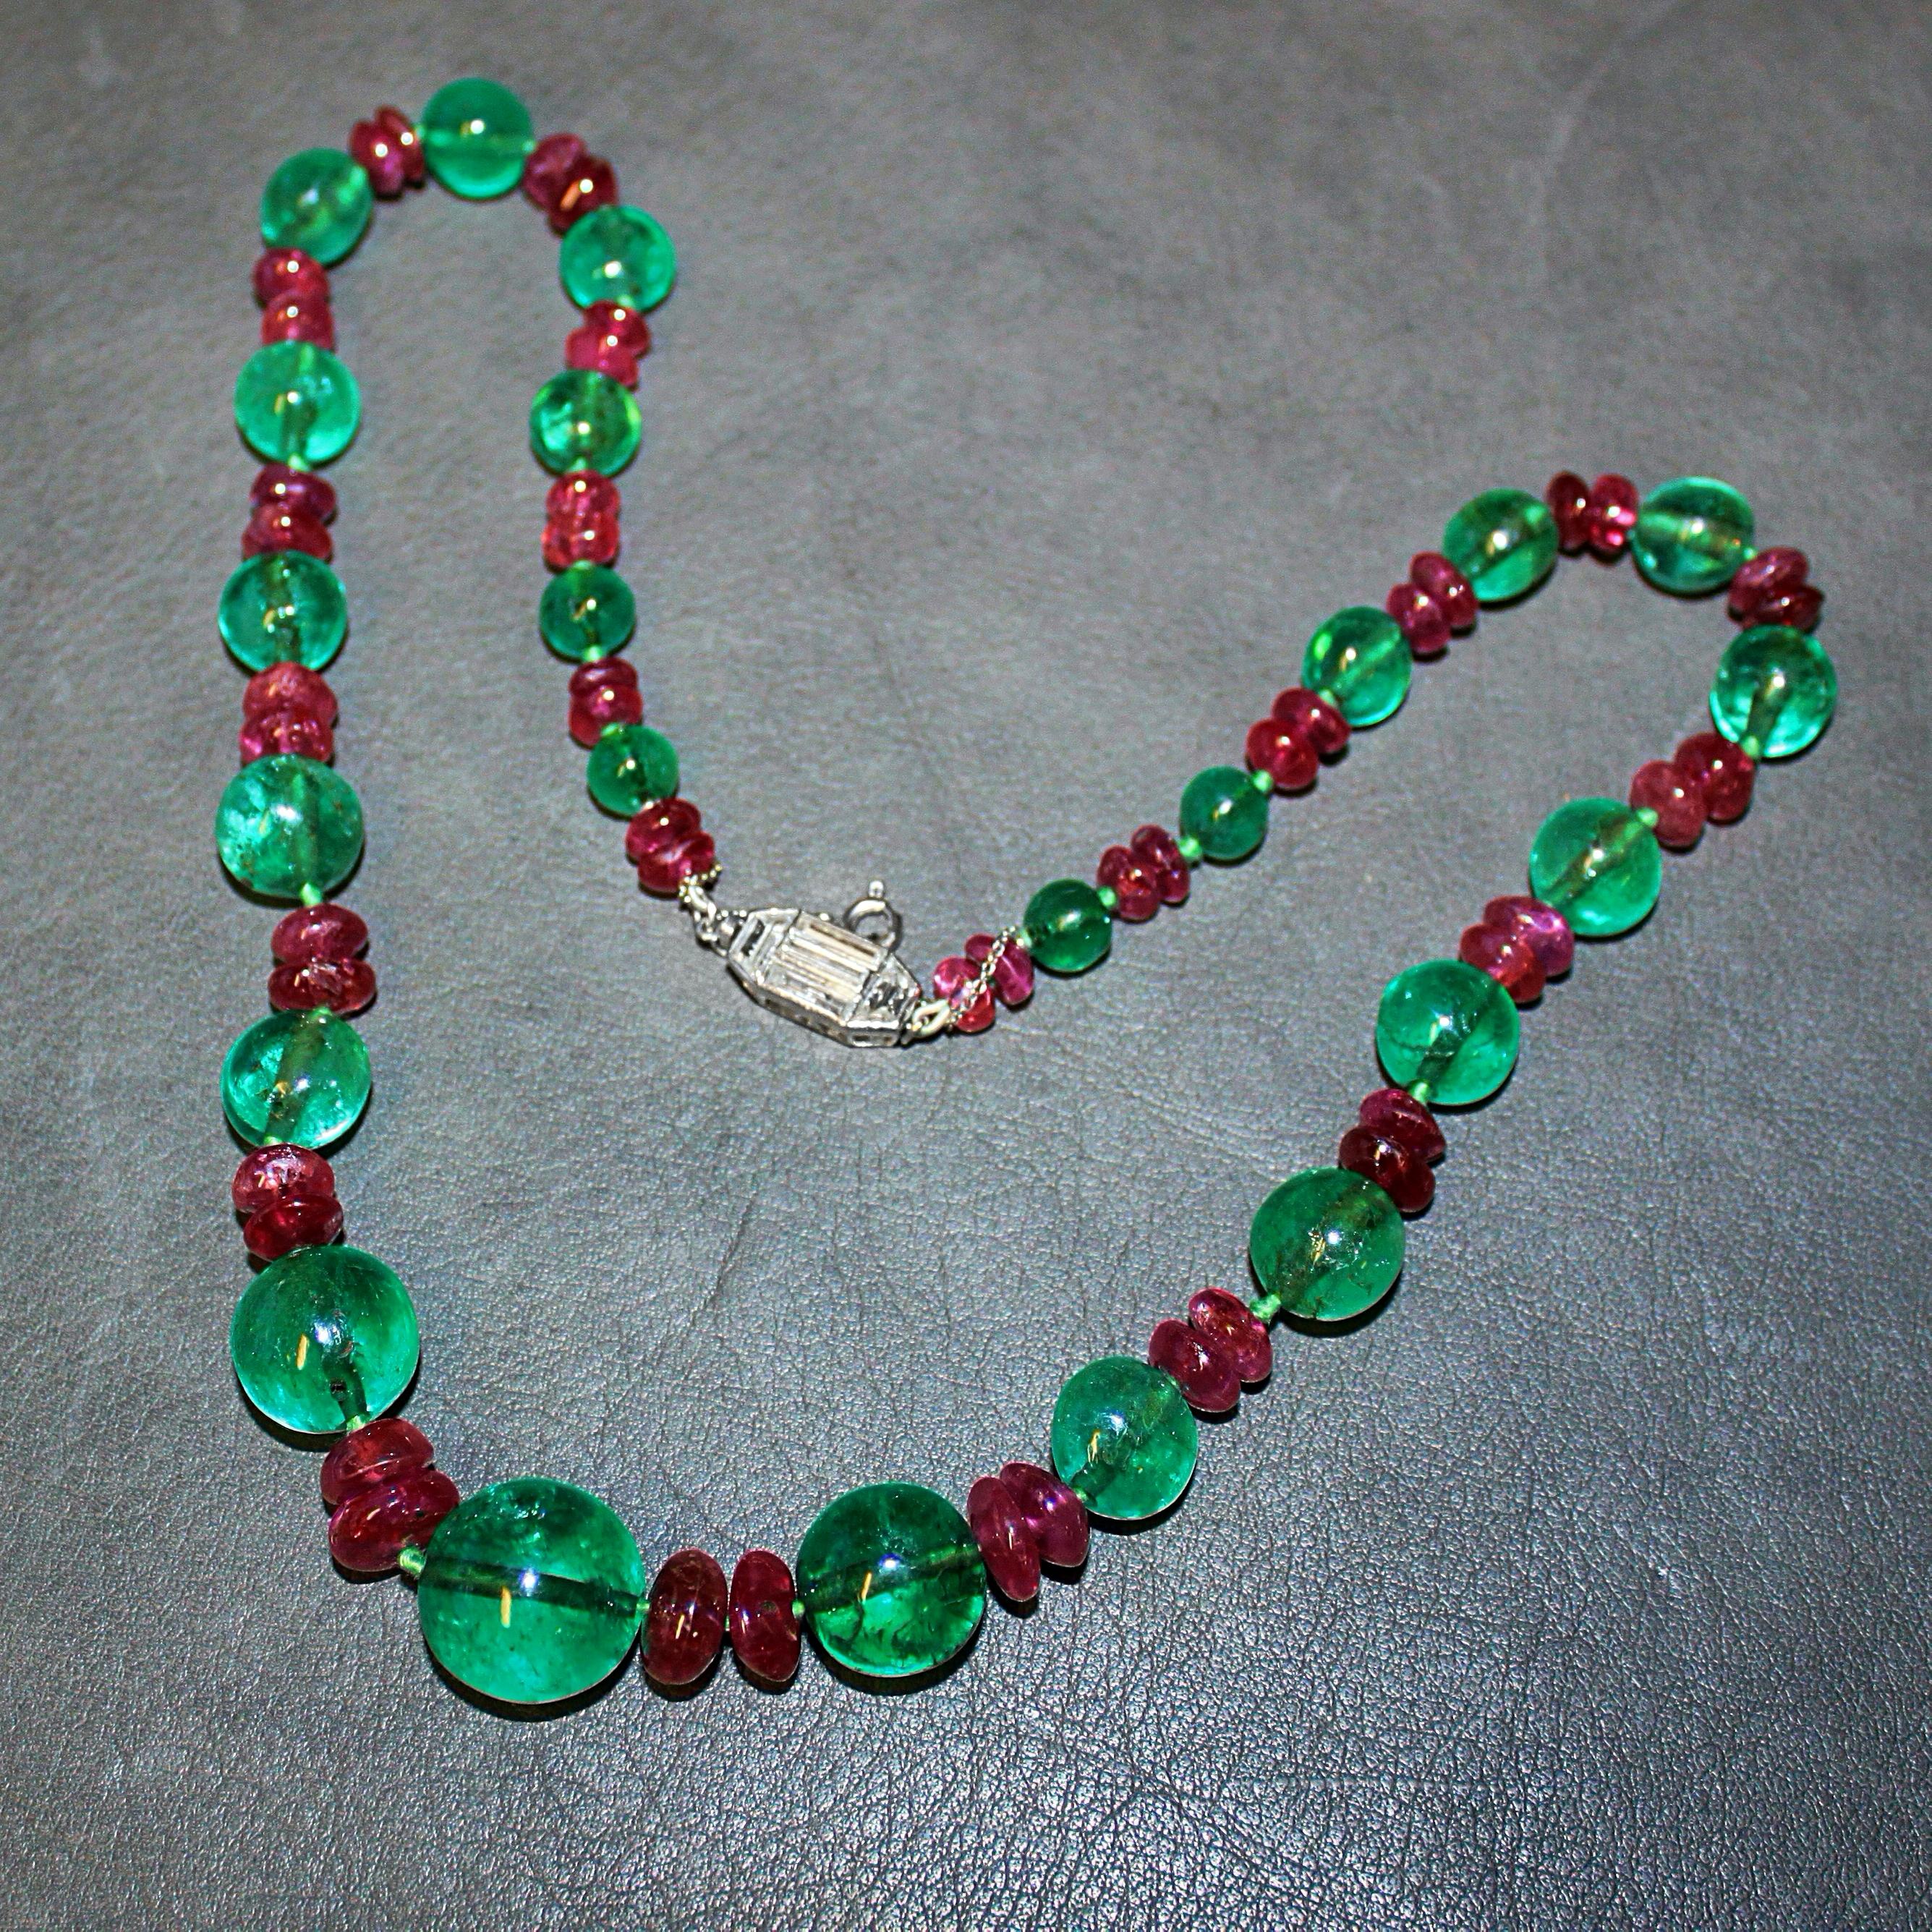 A magnificent French emerald, ruby and diamond Art Deco necklace, ca. 1920s. 

The large old-mine emerald beads have a deep green colour and crystal. They are alternatingly strung next to two old ruby beads in a graduating manner. The clasp at the